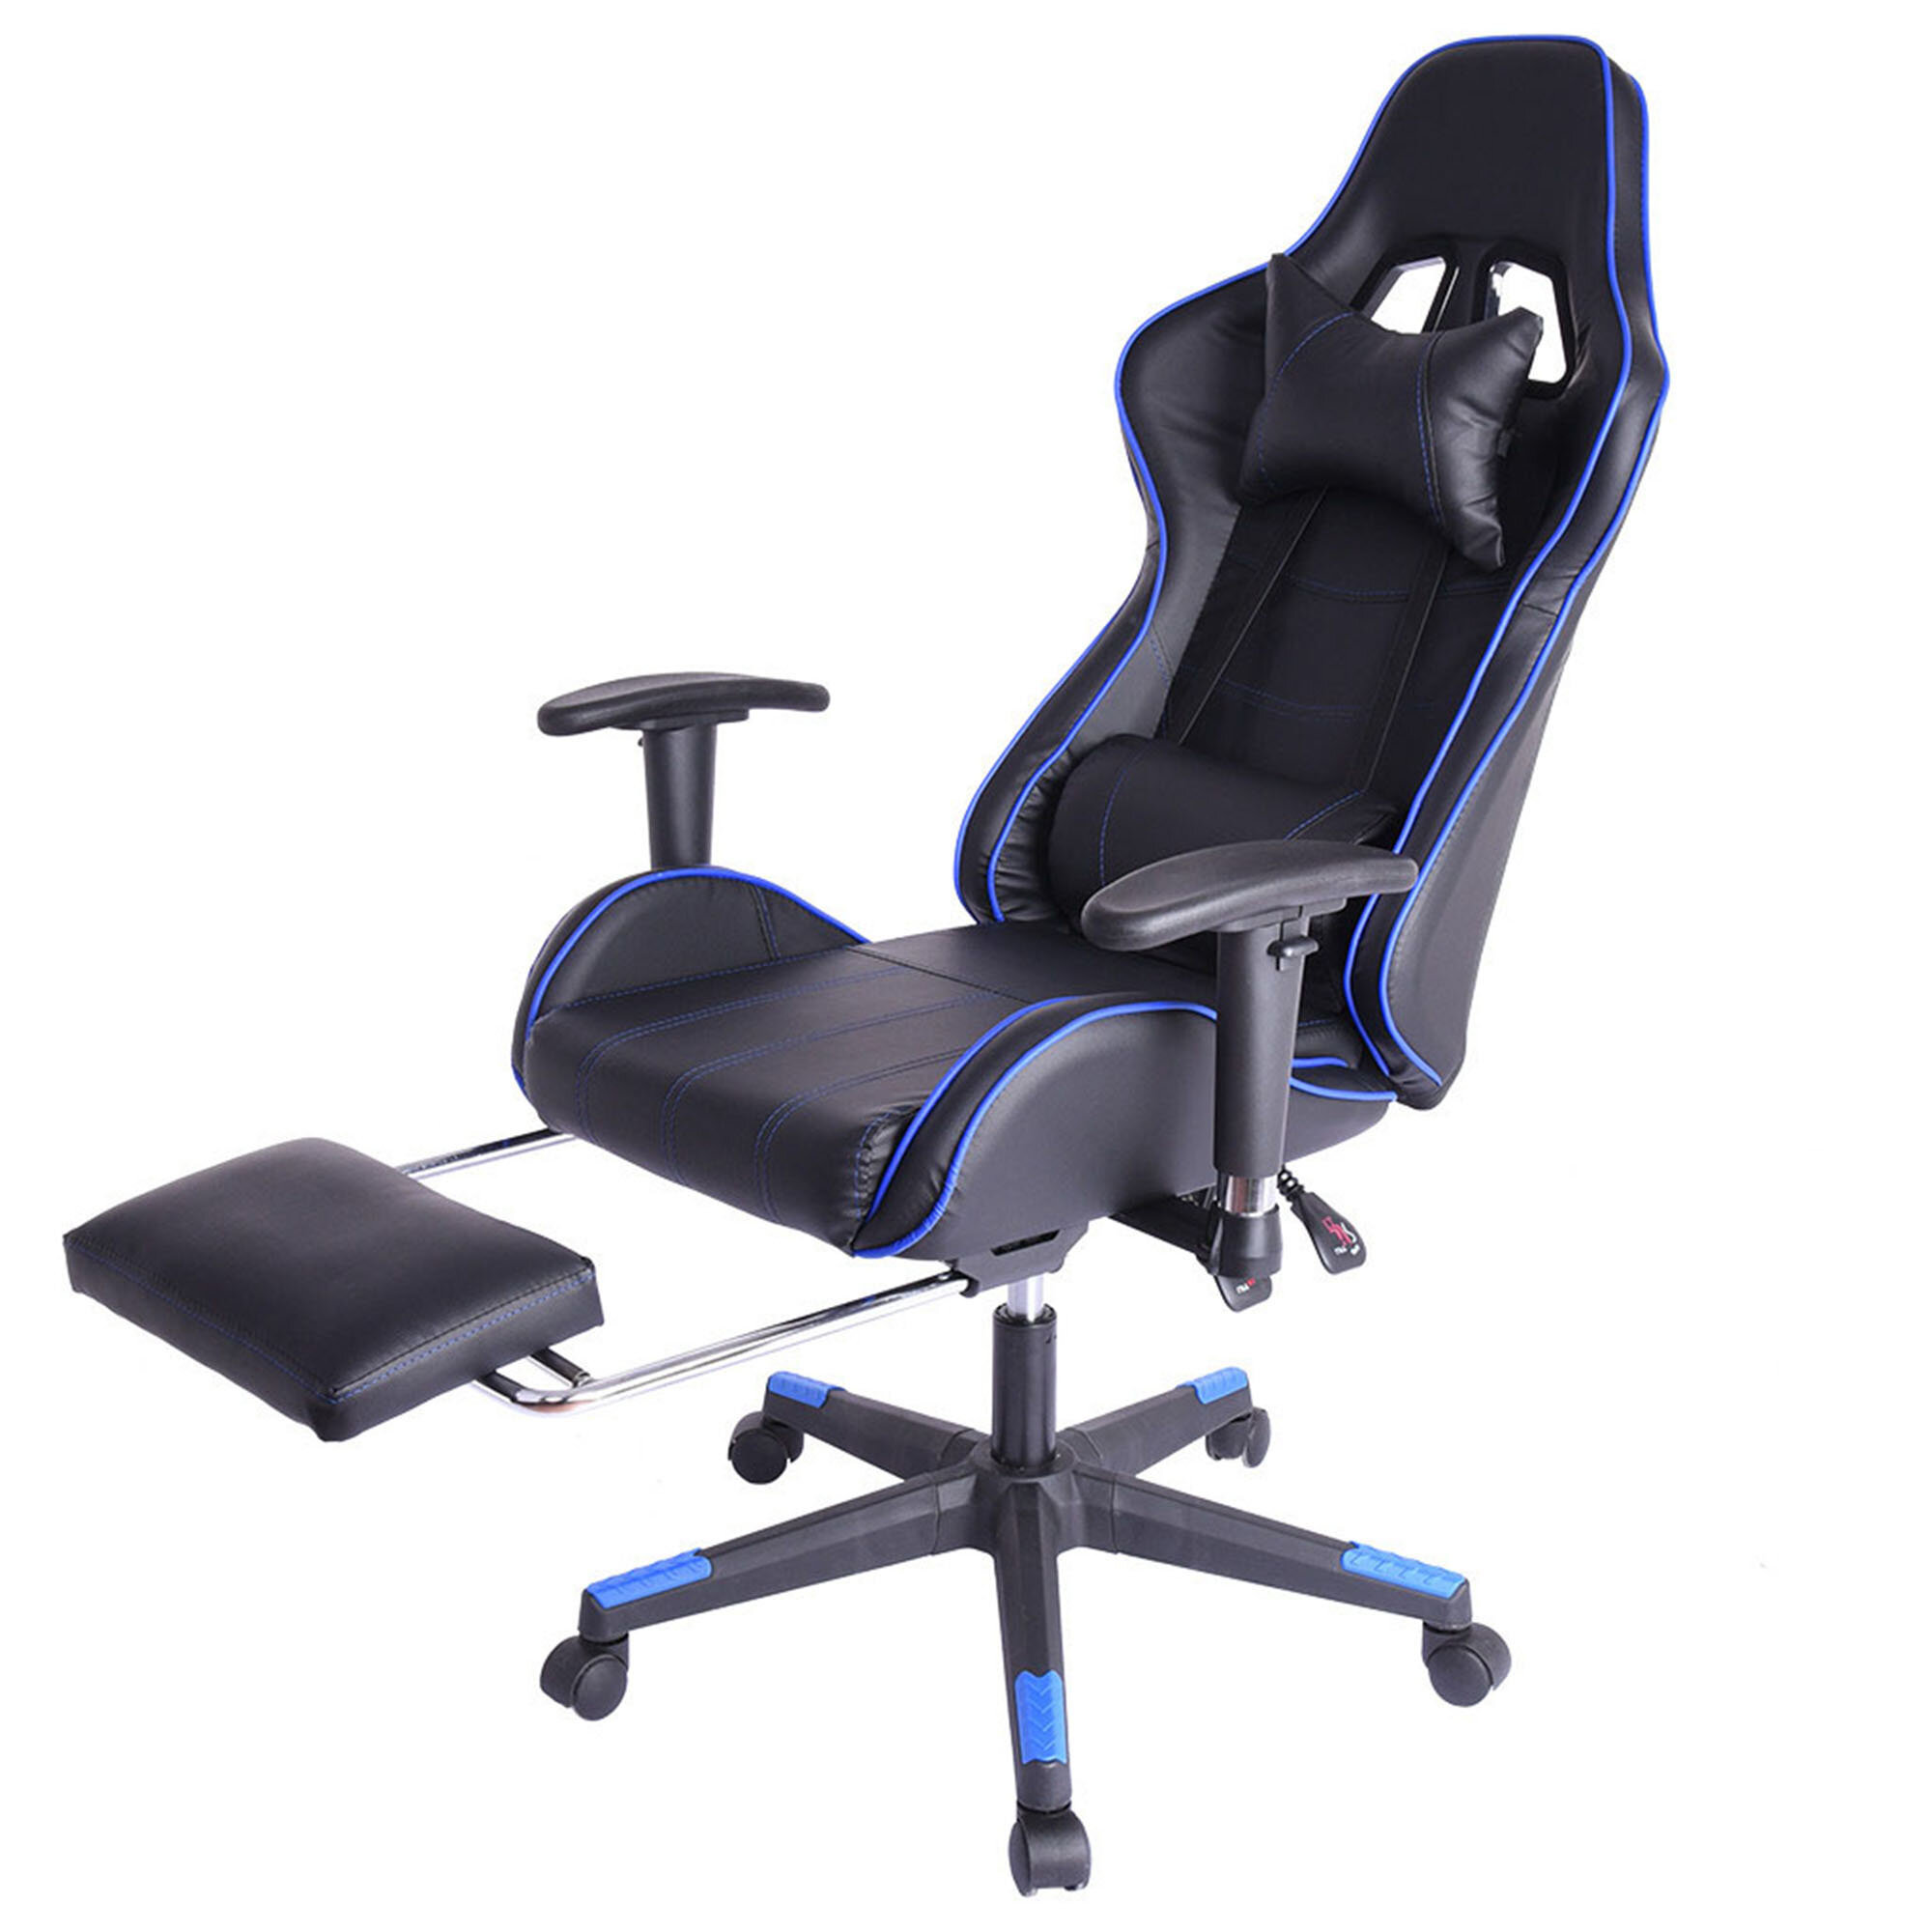 Pink Gaming Chair Office Chair Racing Chair with Footrest,Backrest and Seat Height Adjustment Recliner with Headrest and Lumbar Pillow E-Sports Chair